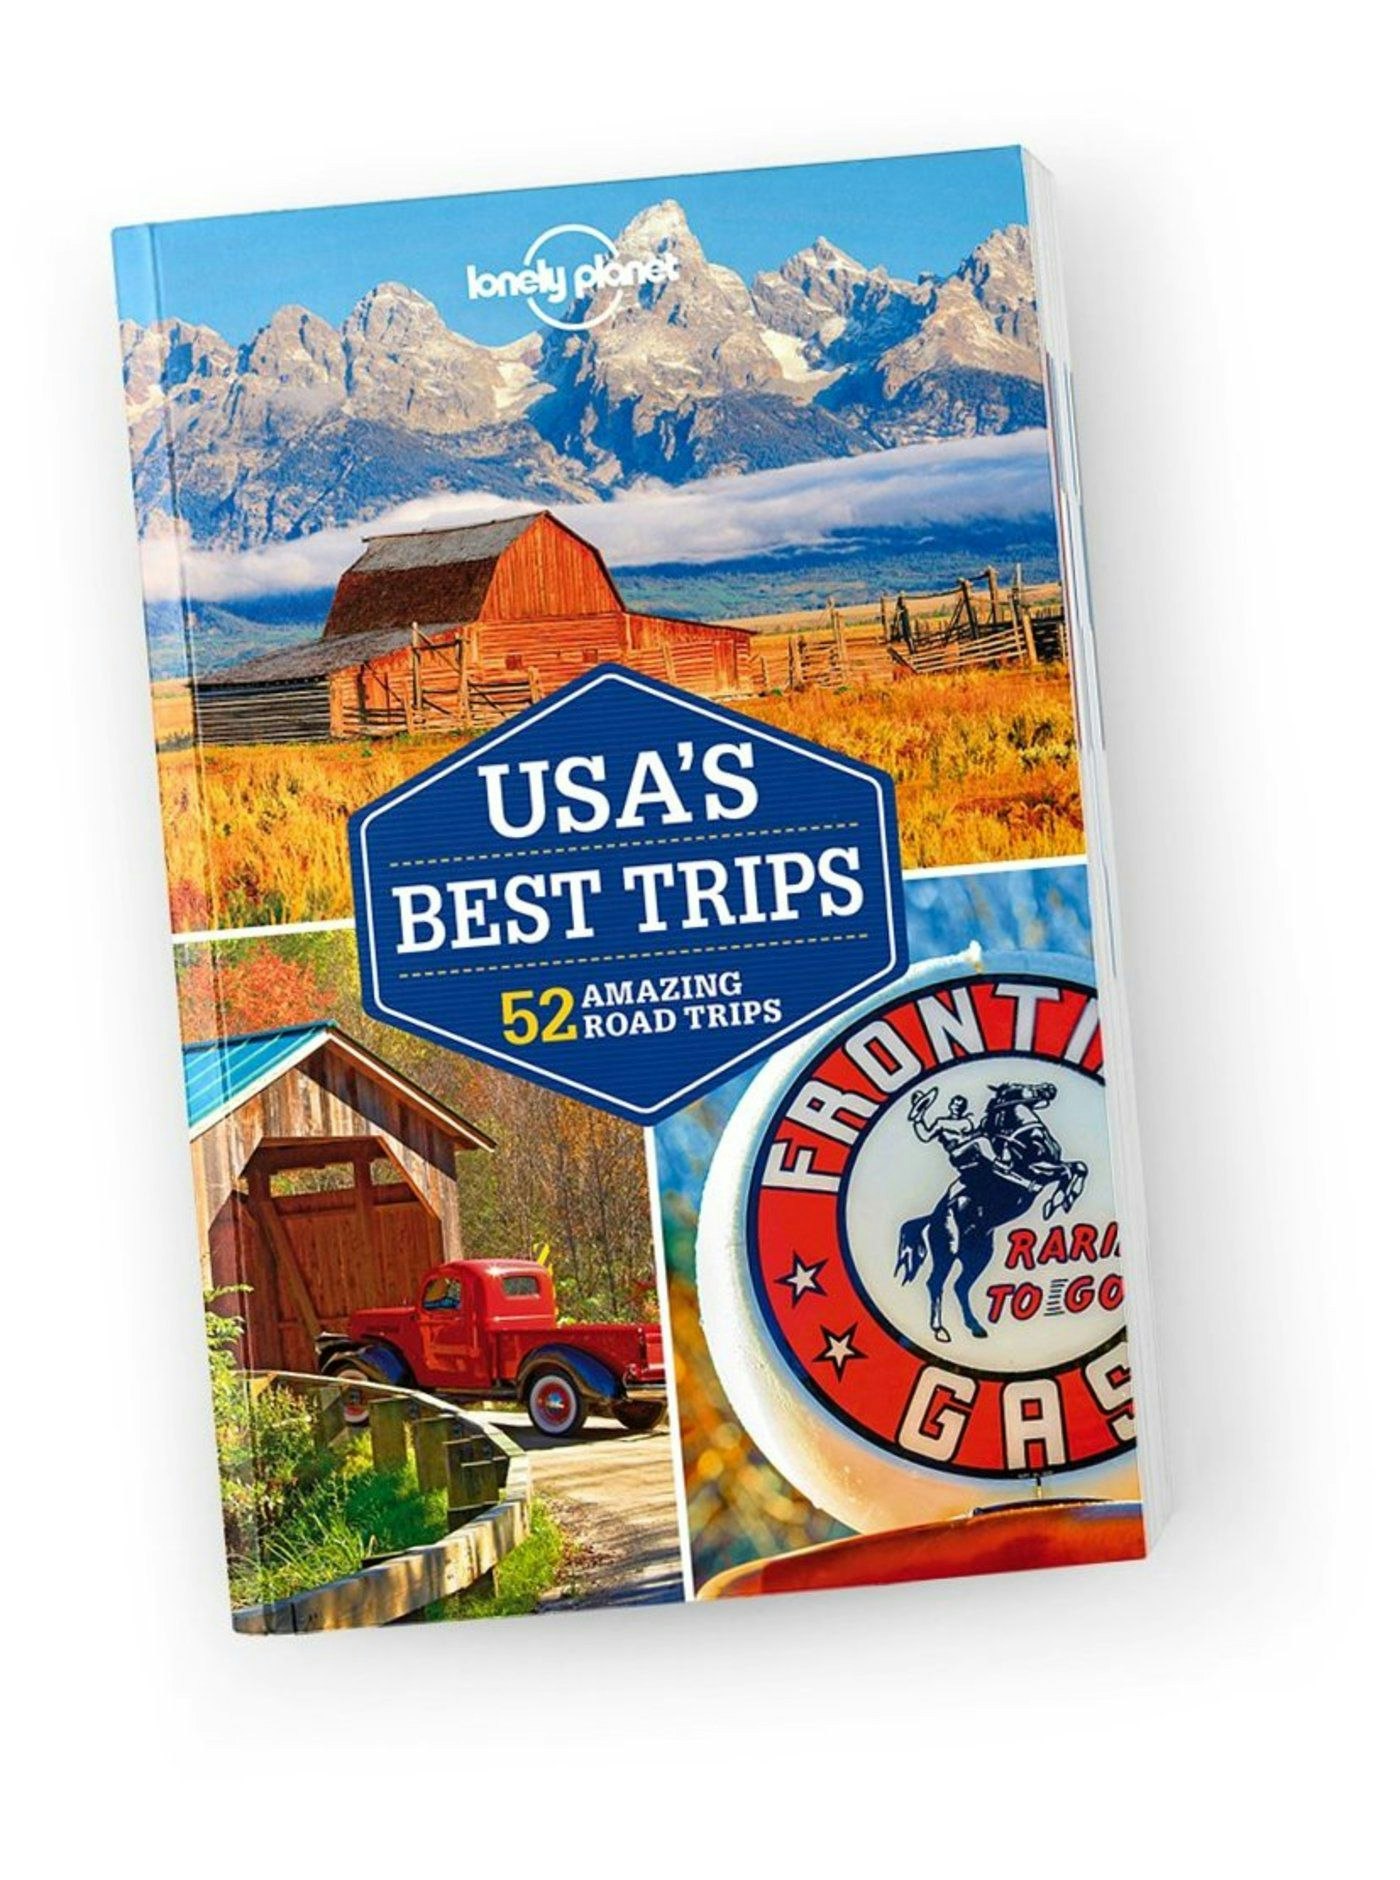 The cover of Lonely Planet USA's Best Trips book